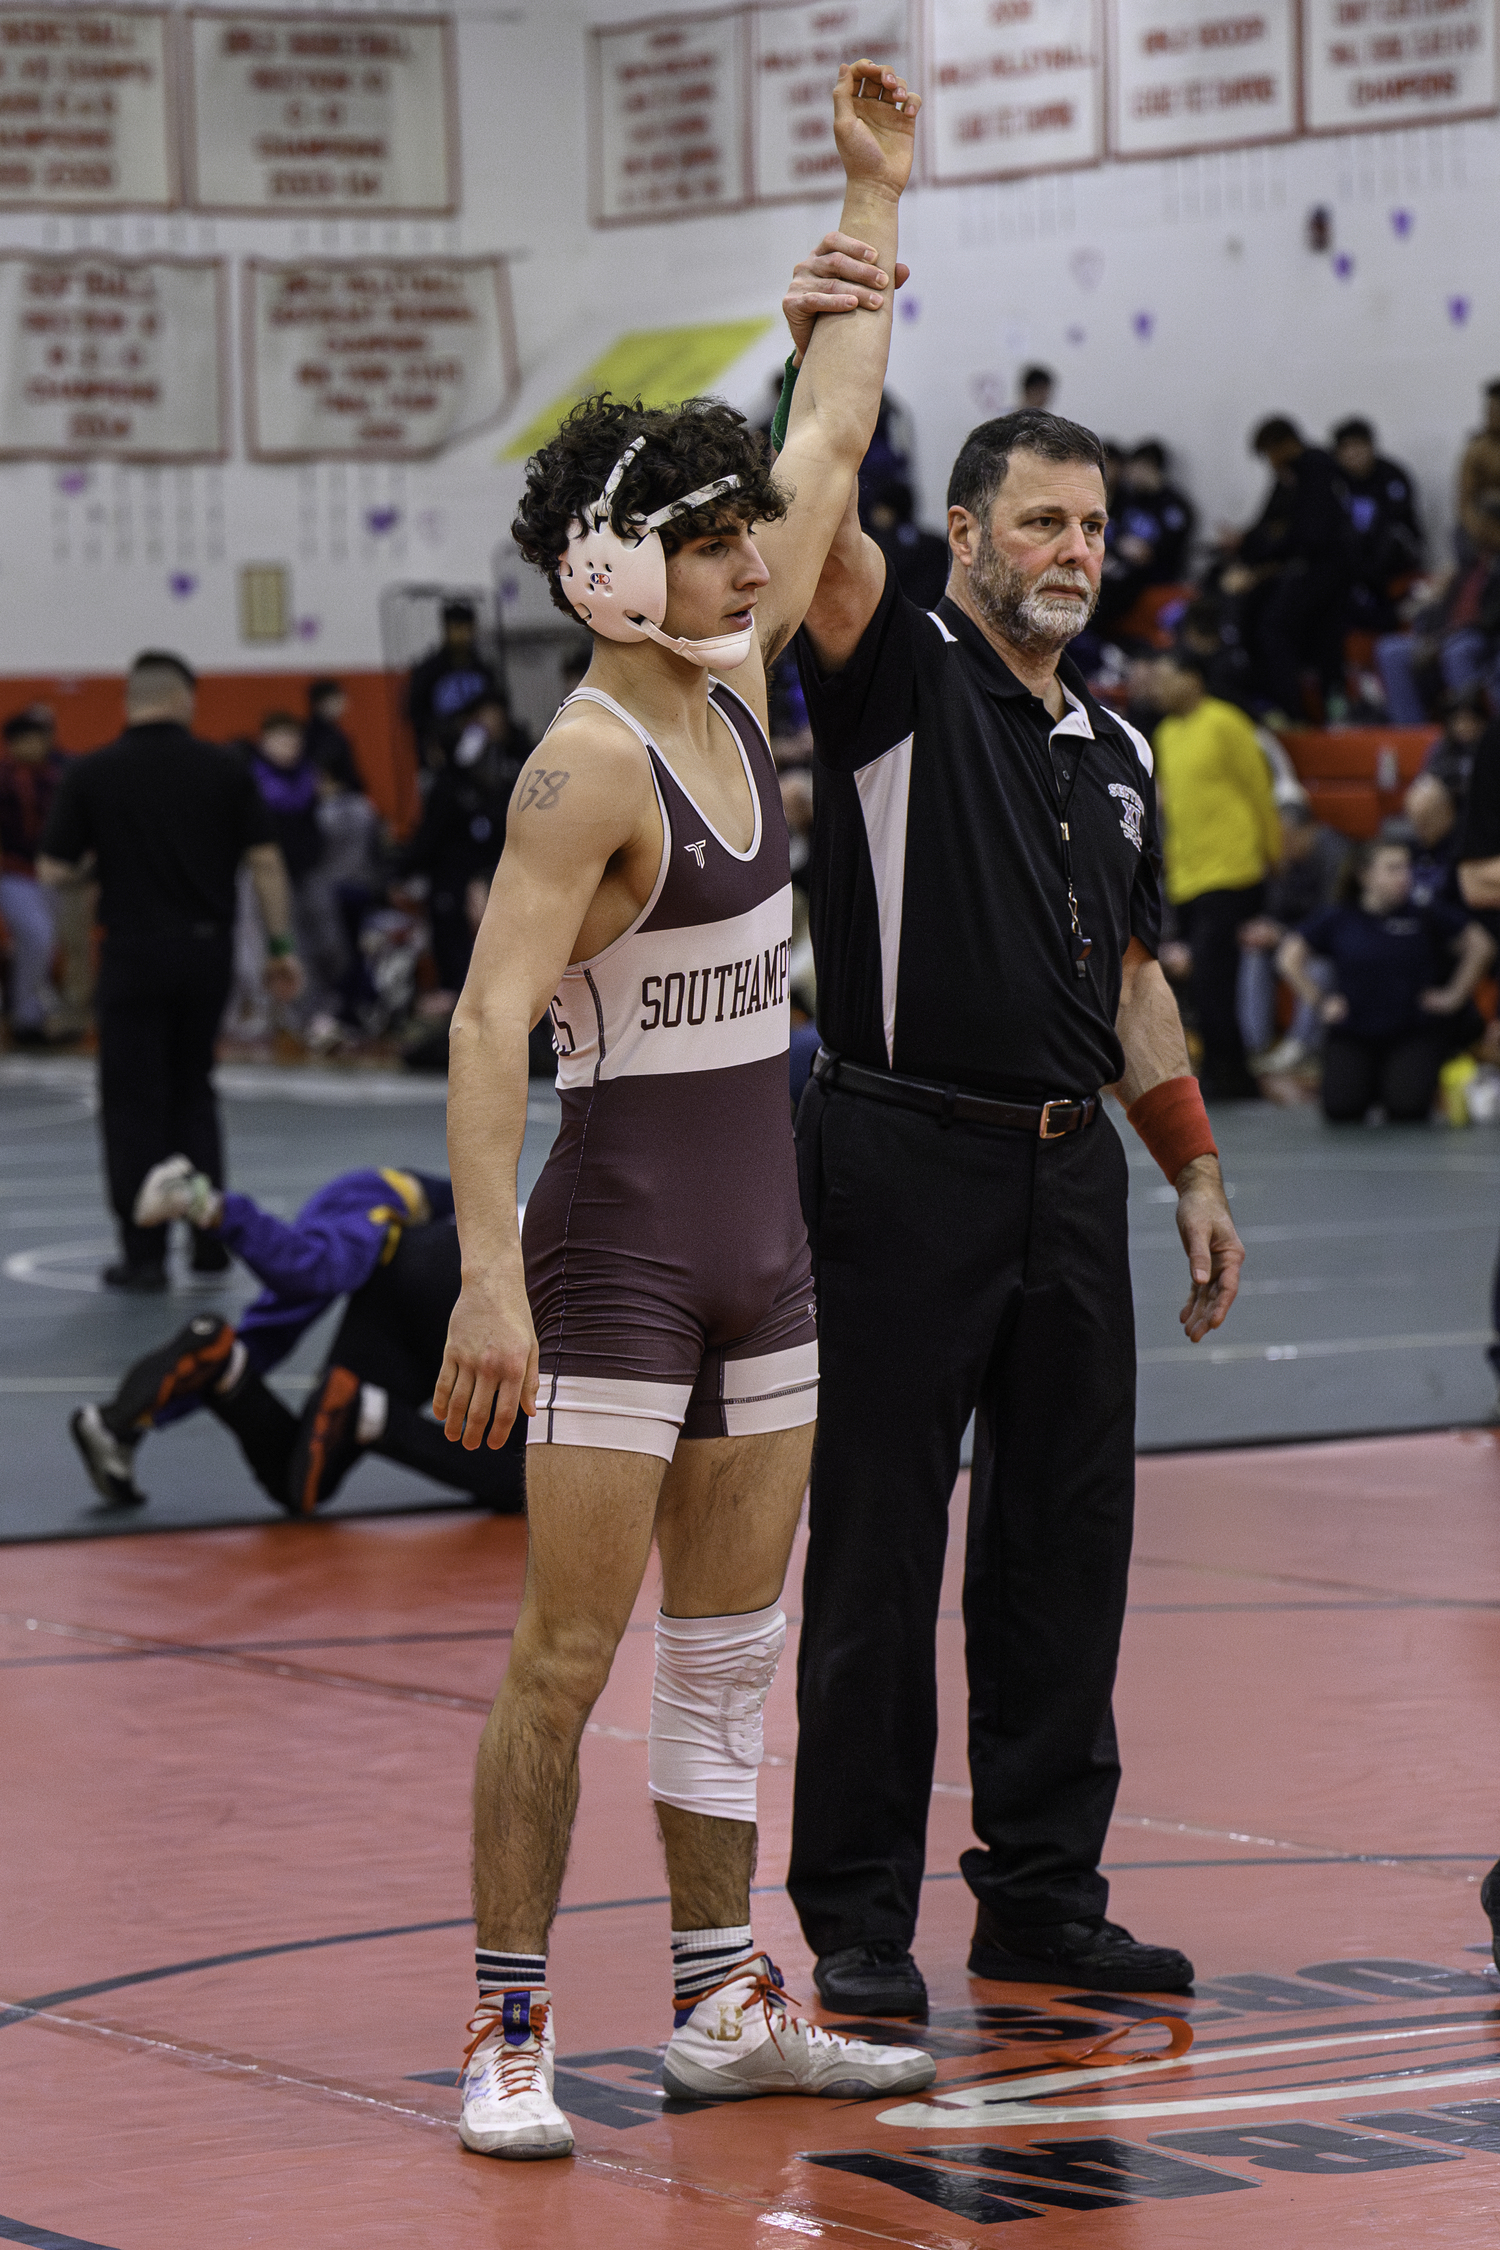 Southampton senior Jack Nastri originally placed third in the county with an opportunity to wrestle for 